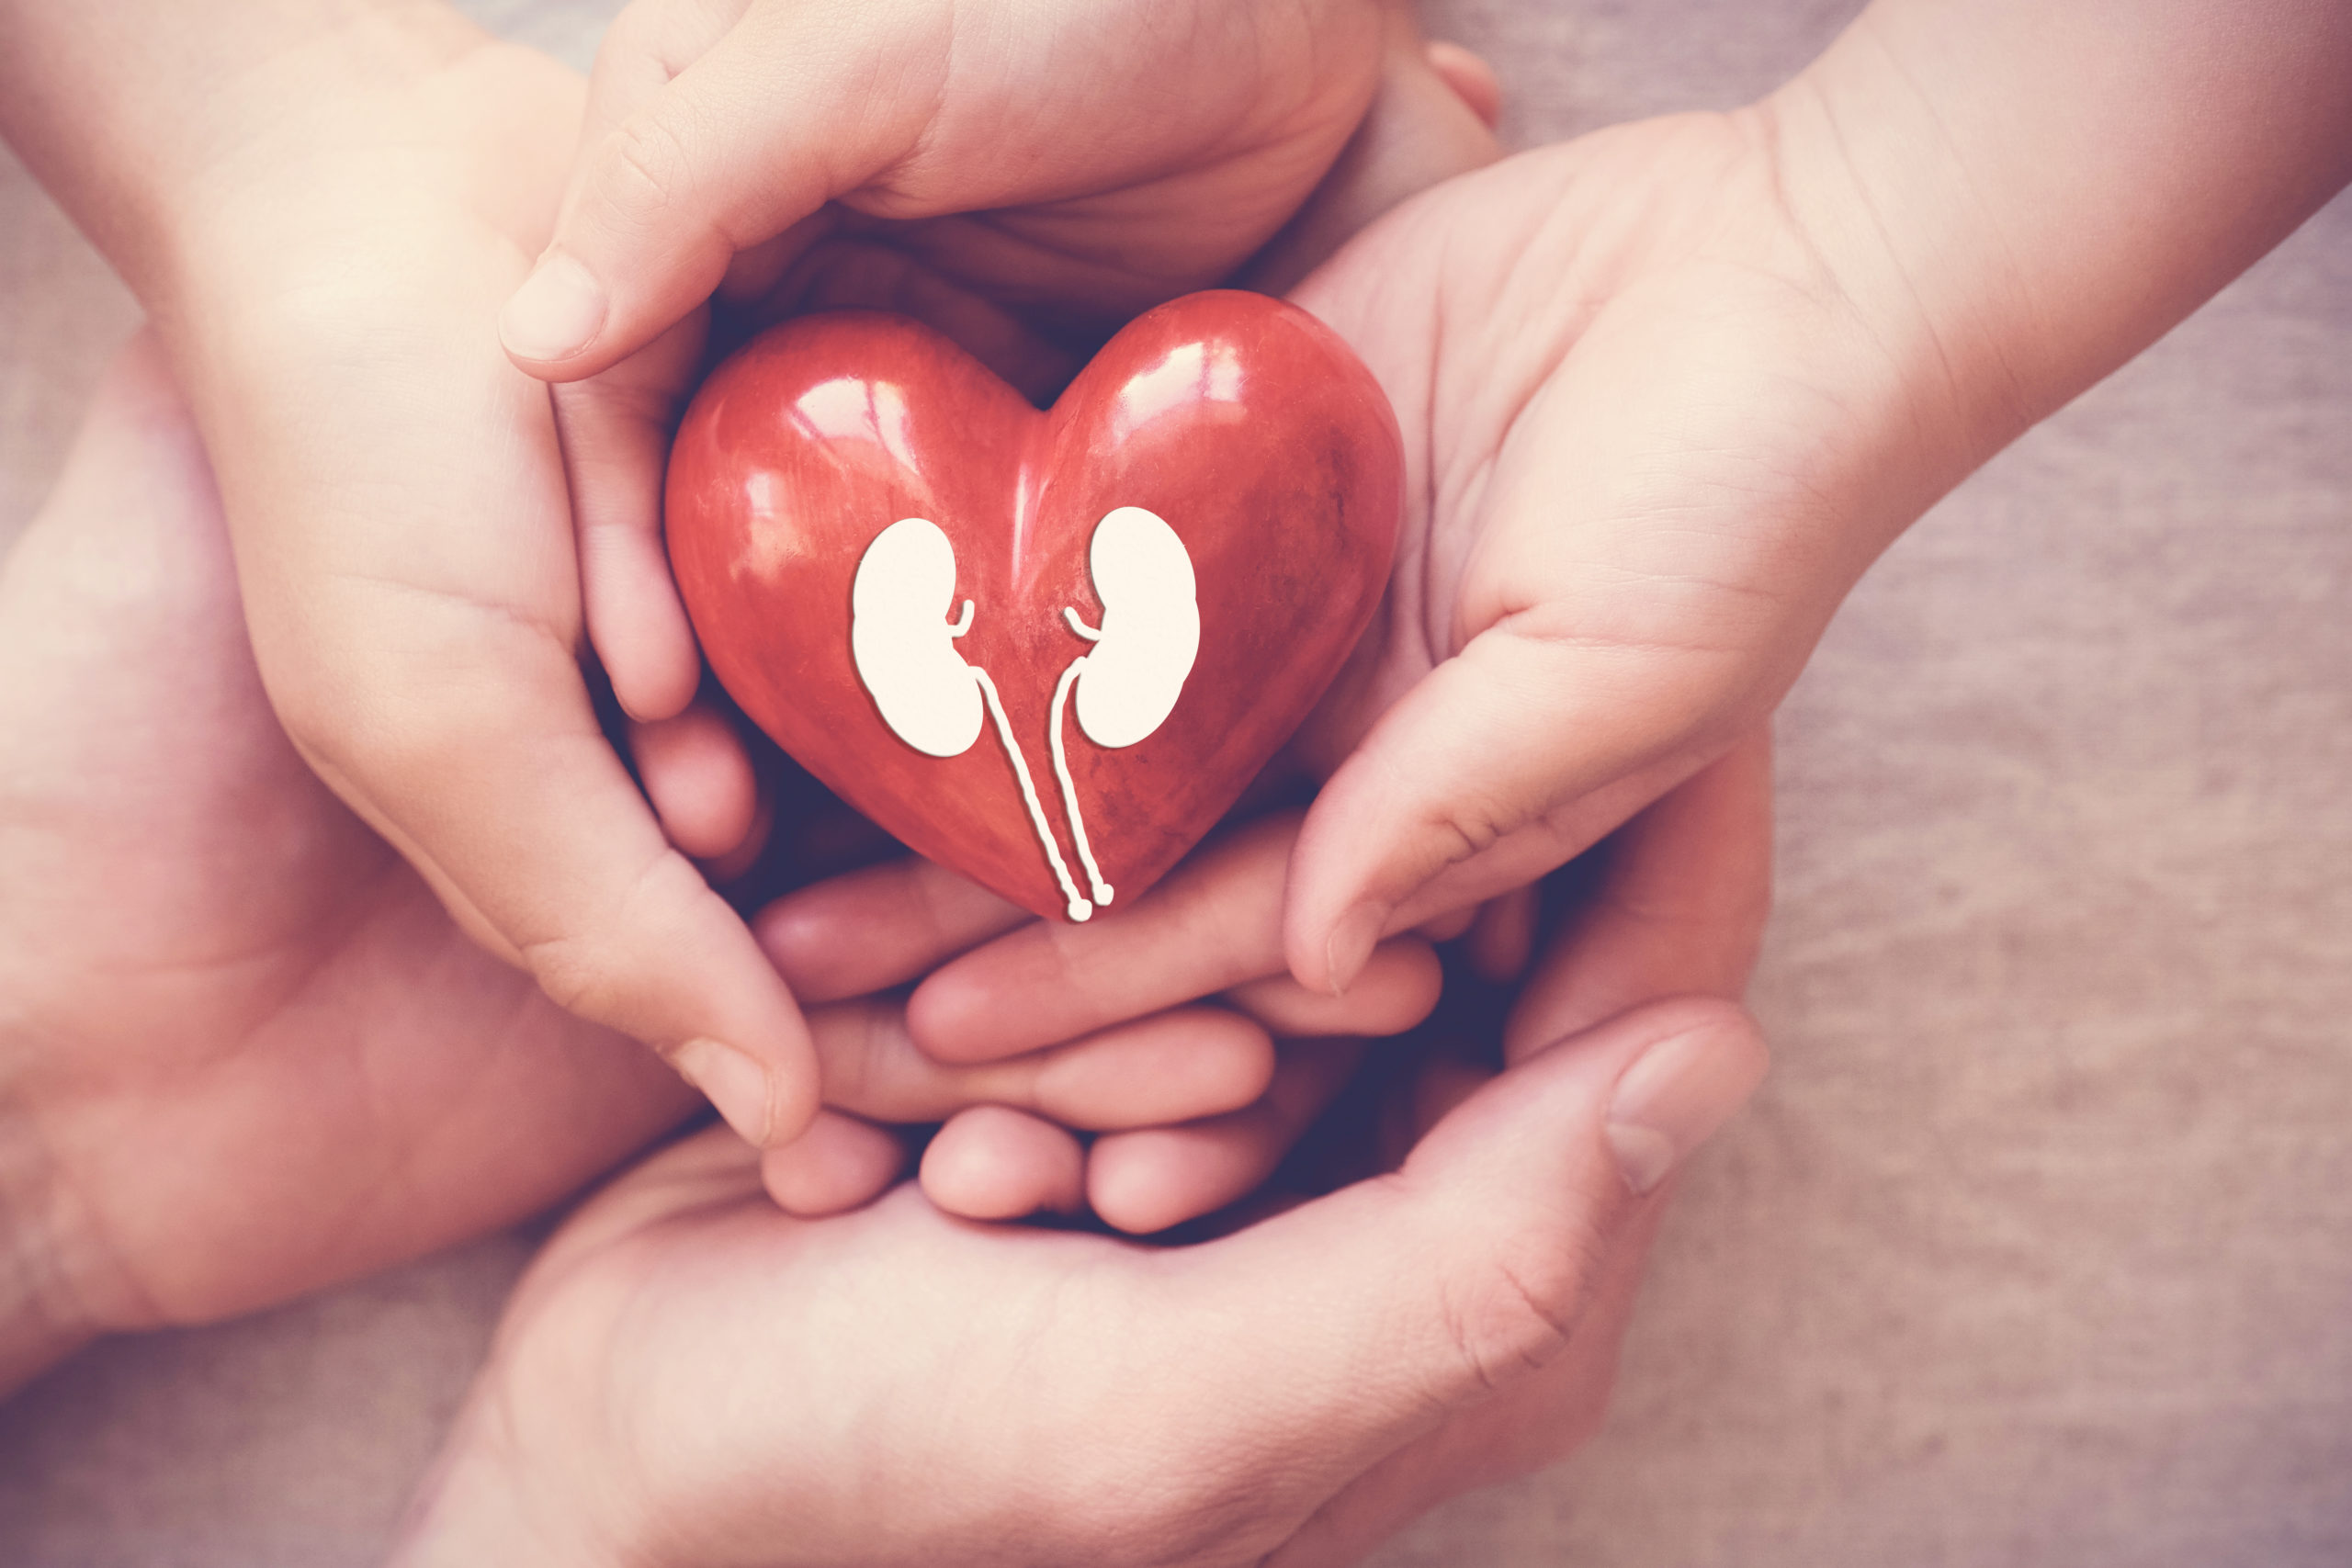 Three sets of hands holding a stone heart with an image of kidneys on it